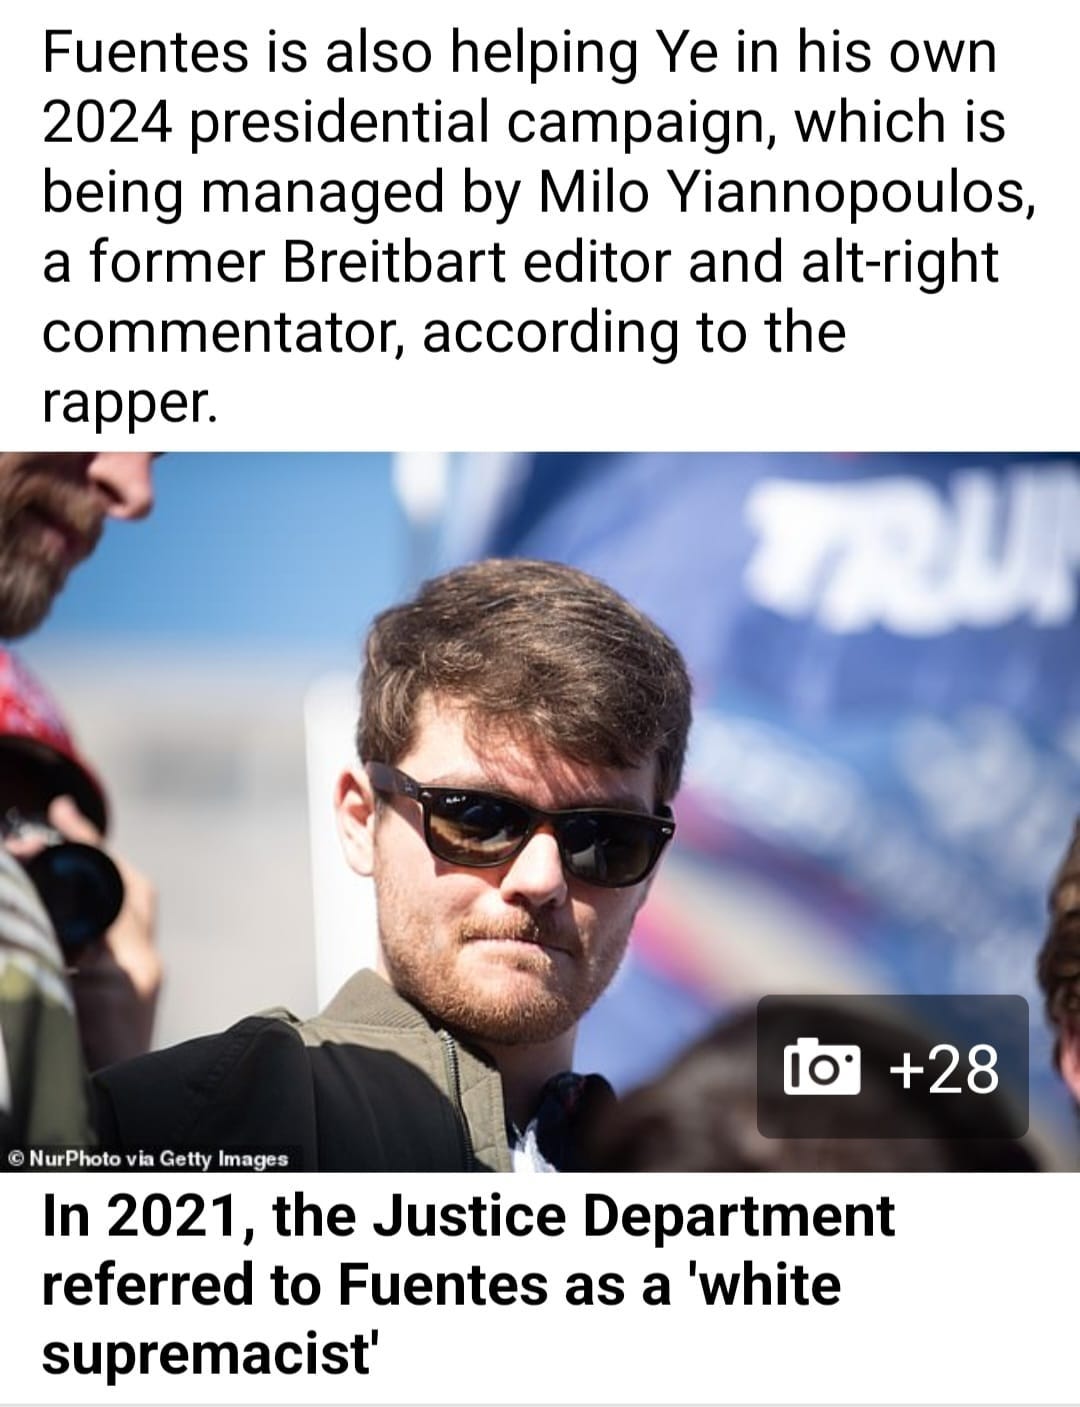 May be an image of 2 people and text that says 'Fuentes is also helping Ye in his own 2024 presidential campaign, which is being managed by Milo Yiannopoulos, a former Breitbart editor and alt-right commentator, according to the rapper. +28 ©NurPhoto via Getty Images In 2021, the Justice Department referred to Fuentes as a 'white supremacist''